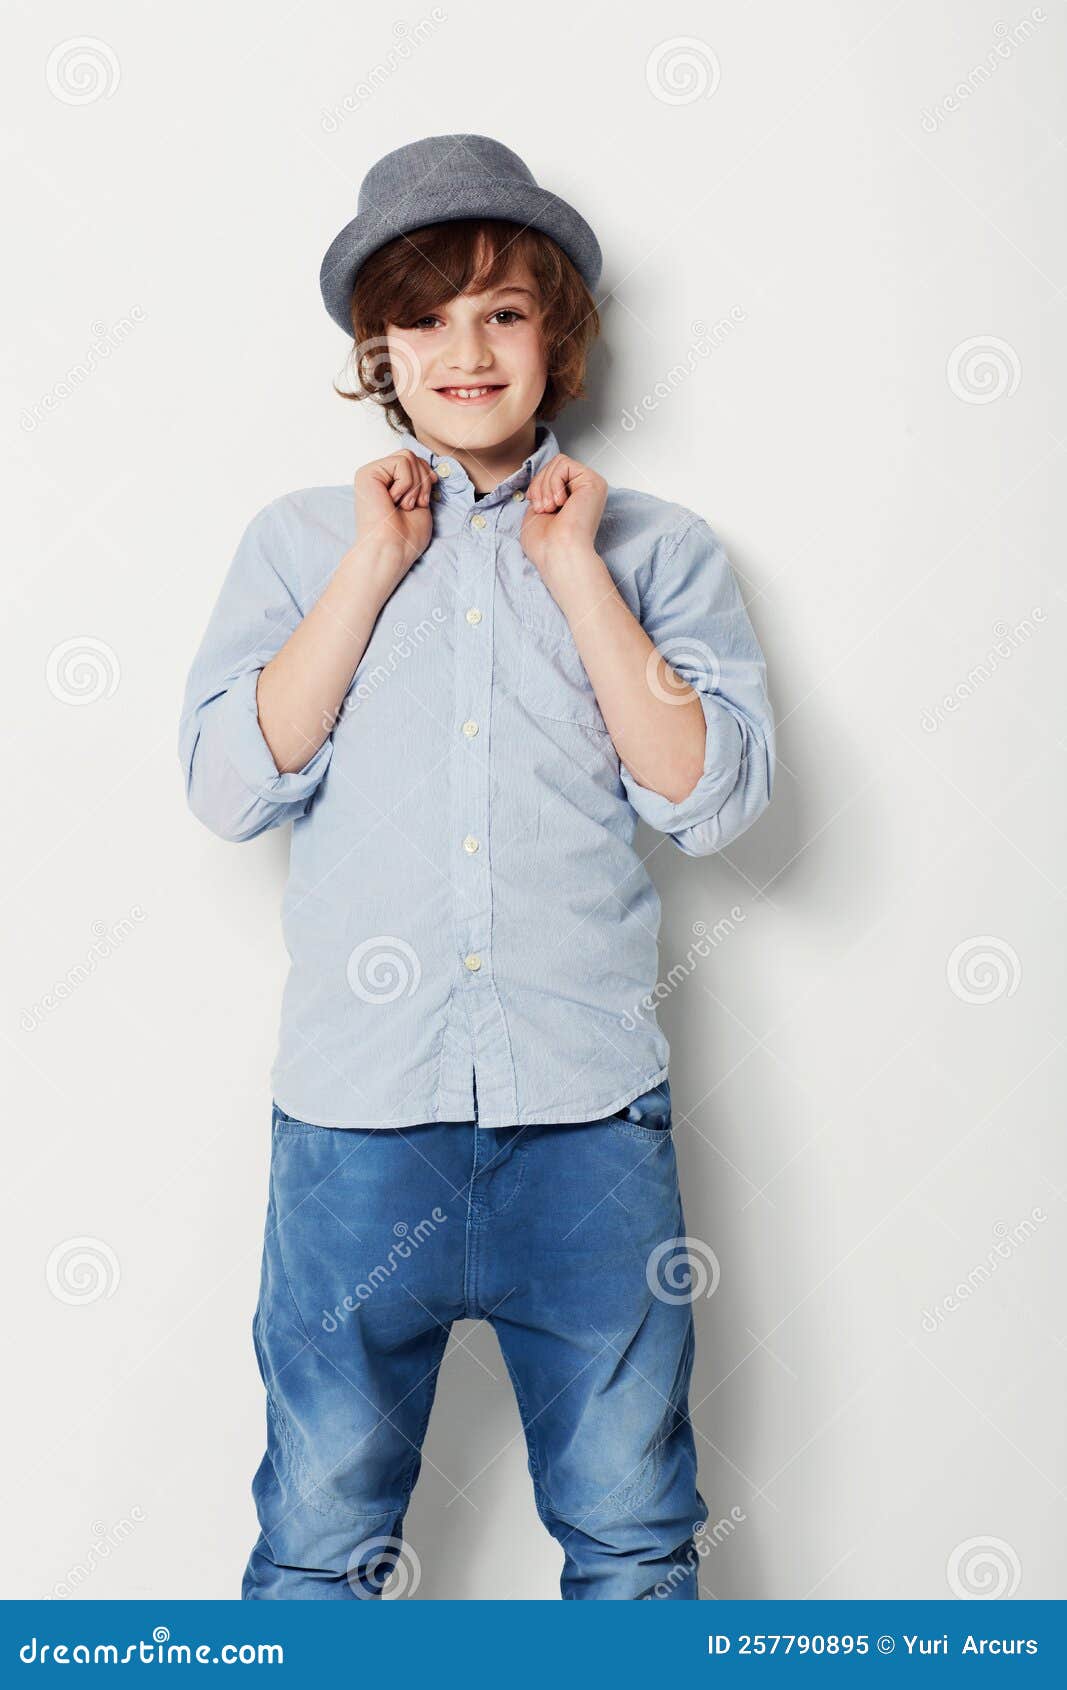 He Knows he Looks Good. Cute Preteen Boy Wearing Trendy Attire while ...